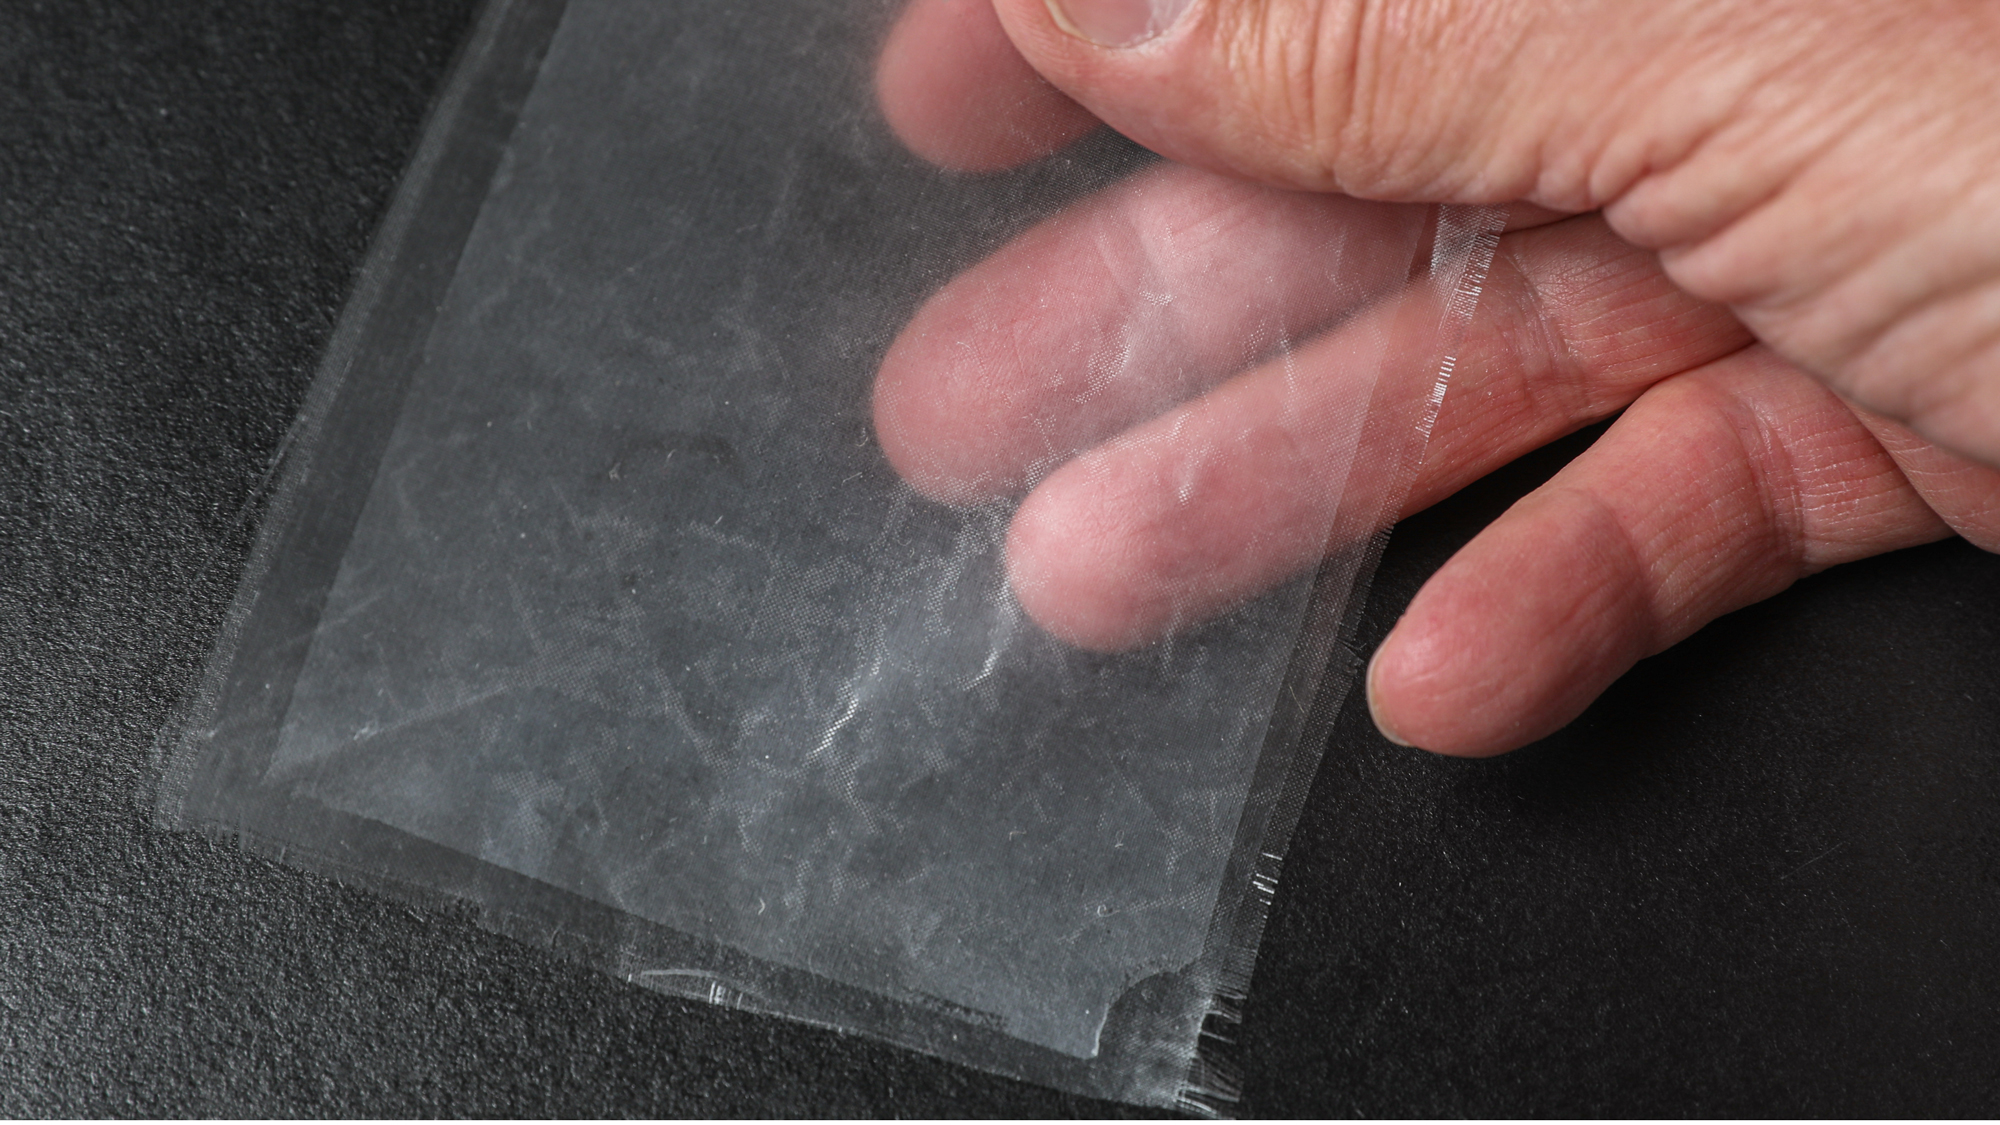 Made from an organic biomass-based material, the transparent masks will be eco-friendly and biodegradable. (Photo: EPFL)